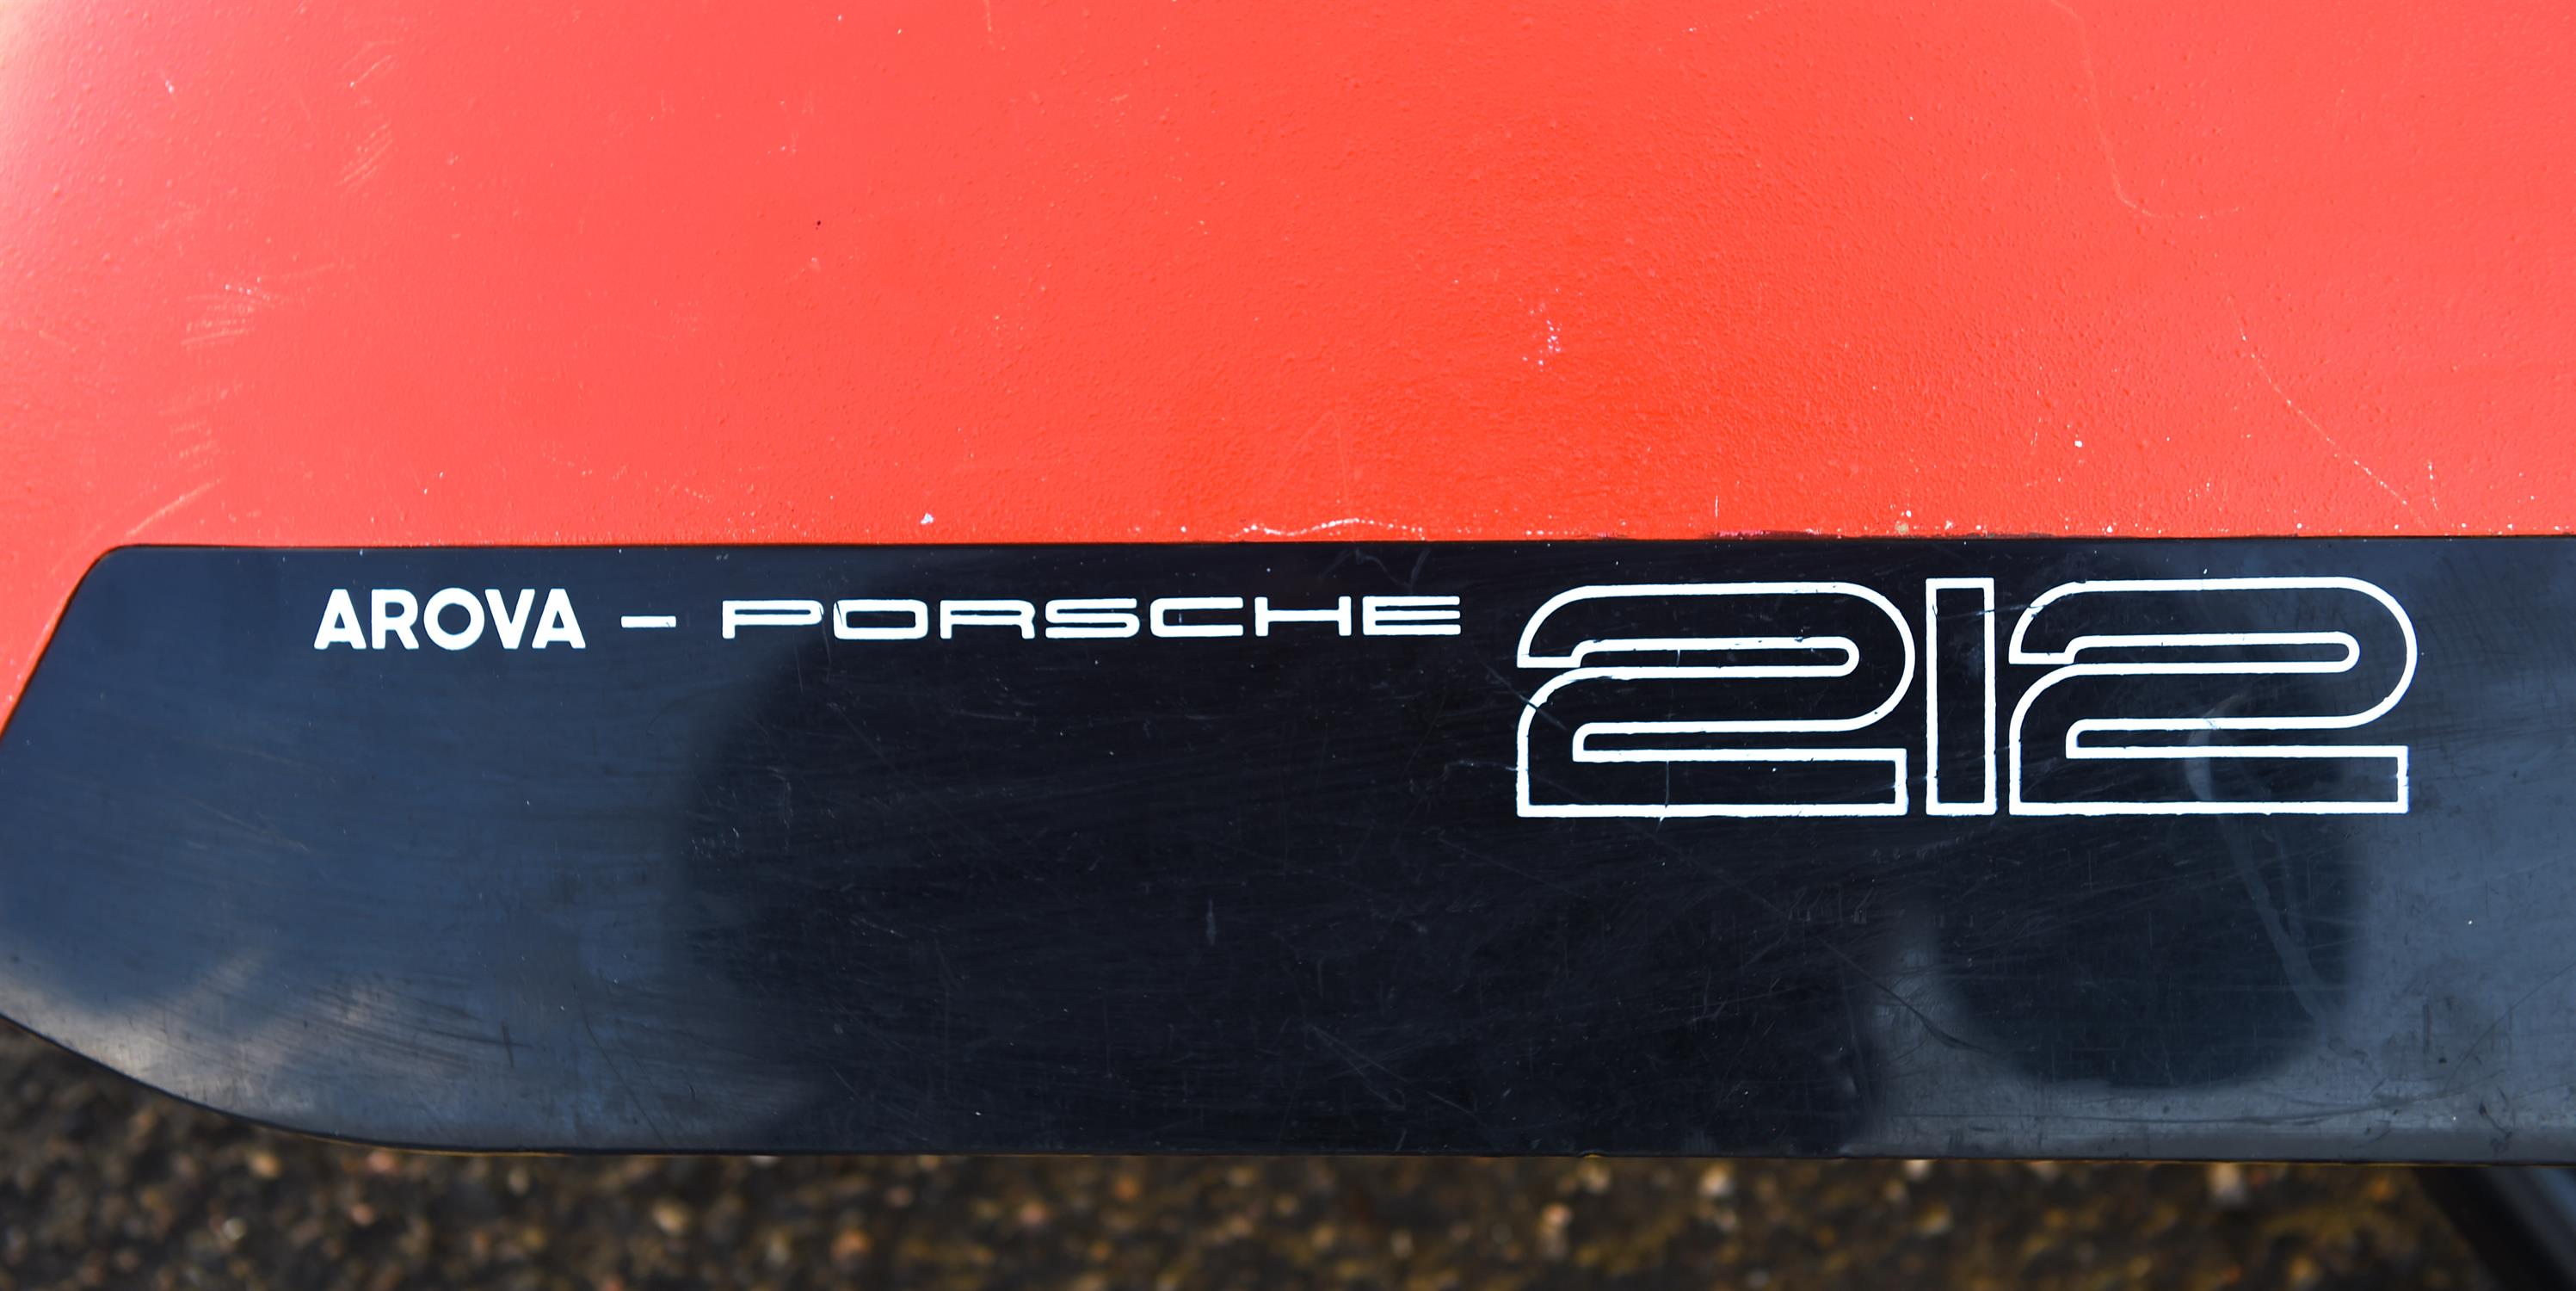 Red Arova-Porsche 212 Skibob - Manufactured in 1970 with the specific dimensions to fit into the - Image 2 of 8